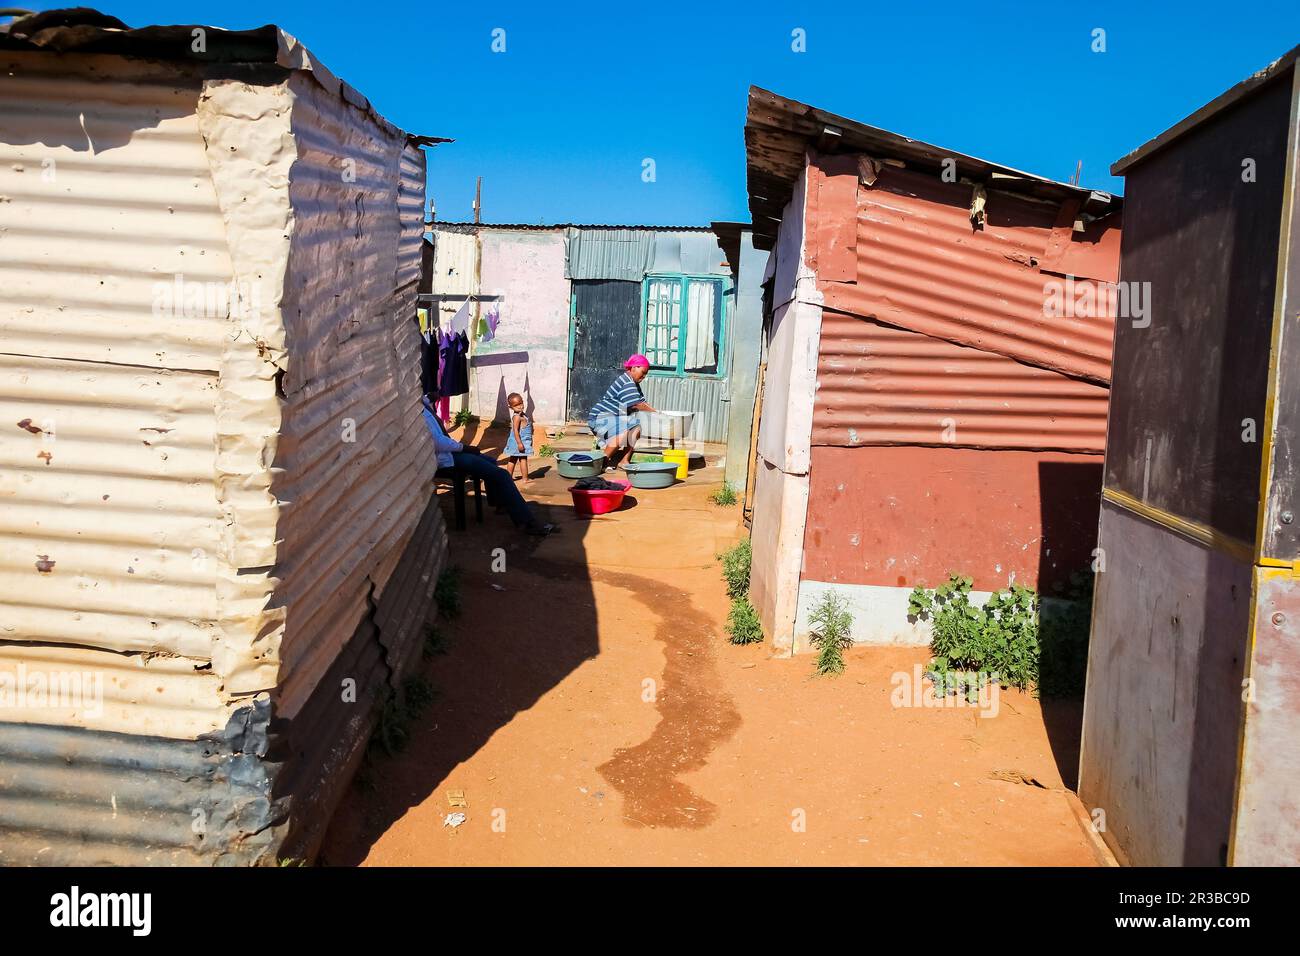 African mother and child washing clothes in Low-income Soweto neighborhood Stock Photo